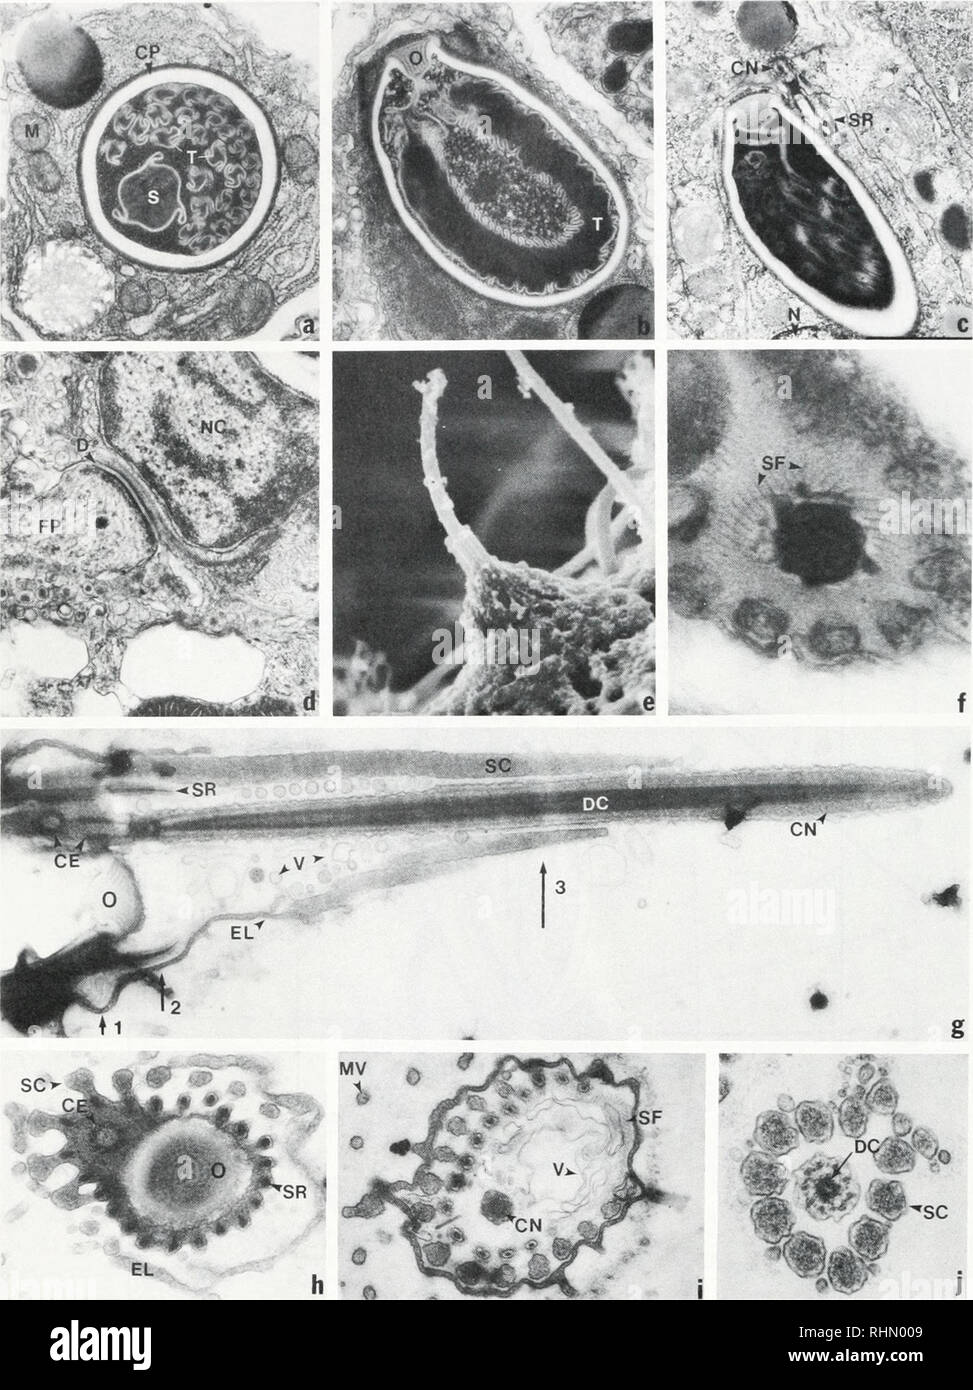 . The Biological bulletin. Biology; Zoology; Biology; Marine Biology. 408 V. M. WEIS ET AL. ':. =ft: :-, i:. FIGURE 4. Nematocyte. (A) Cross-section of an atrichous isorhiza. Note the stylet and small thread (16.620X). (B) Longitudinal section of a desmoneme. Note the single large thread (16.620X). (C) Cnidoblast in the endoderm (10.234X). (D) Desmosome between the base of a nematocyte and a foot process of an EMC (16,620X). (E) A scanning micrograph of a cnidocil on the surface of a planula (8.867X). (F) Cross-section of a cnidocil and cnidocil-associated apparatus. Note the fine filamentous  Stock Photo